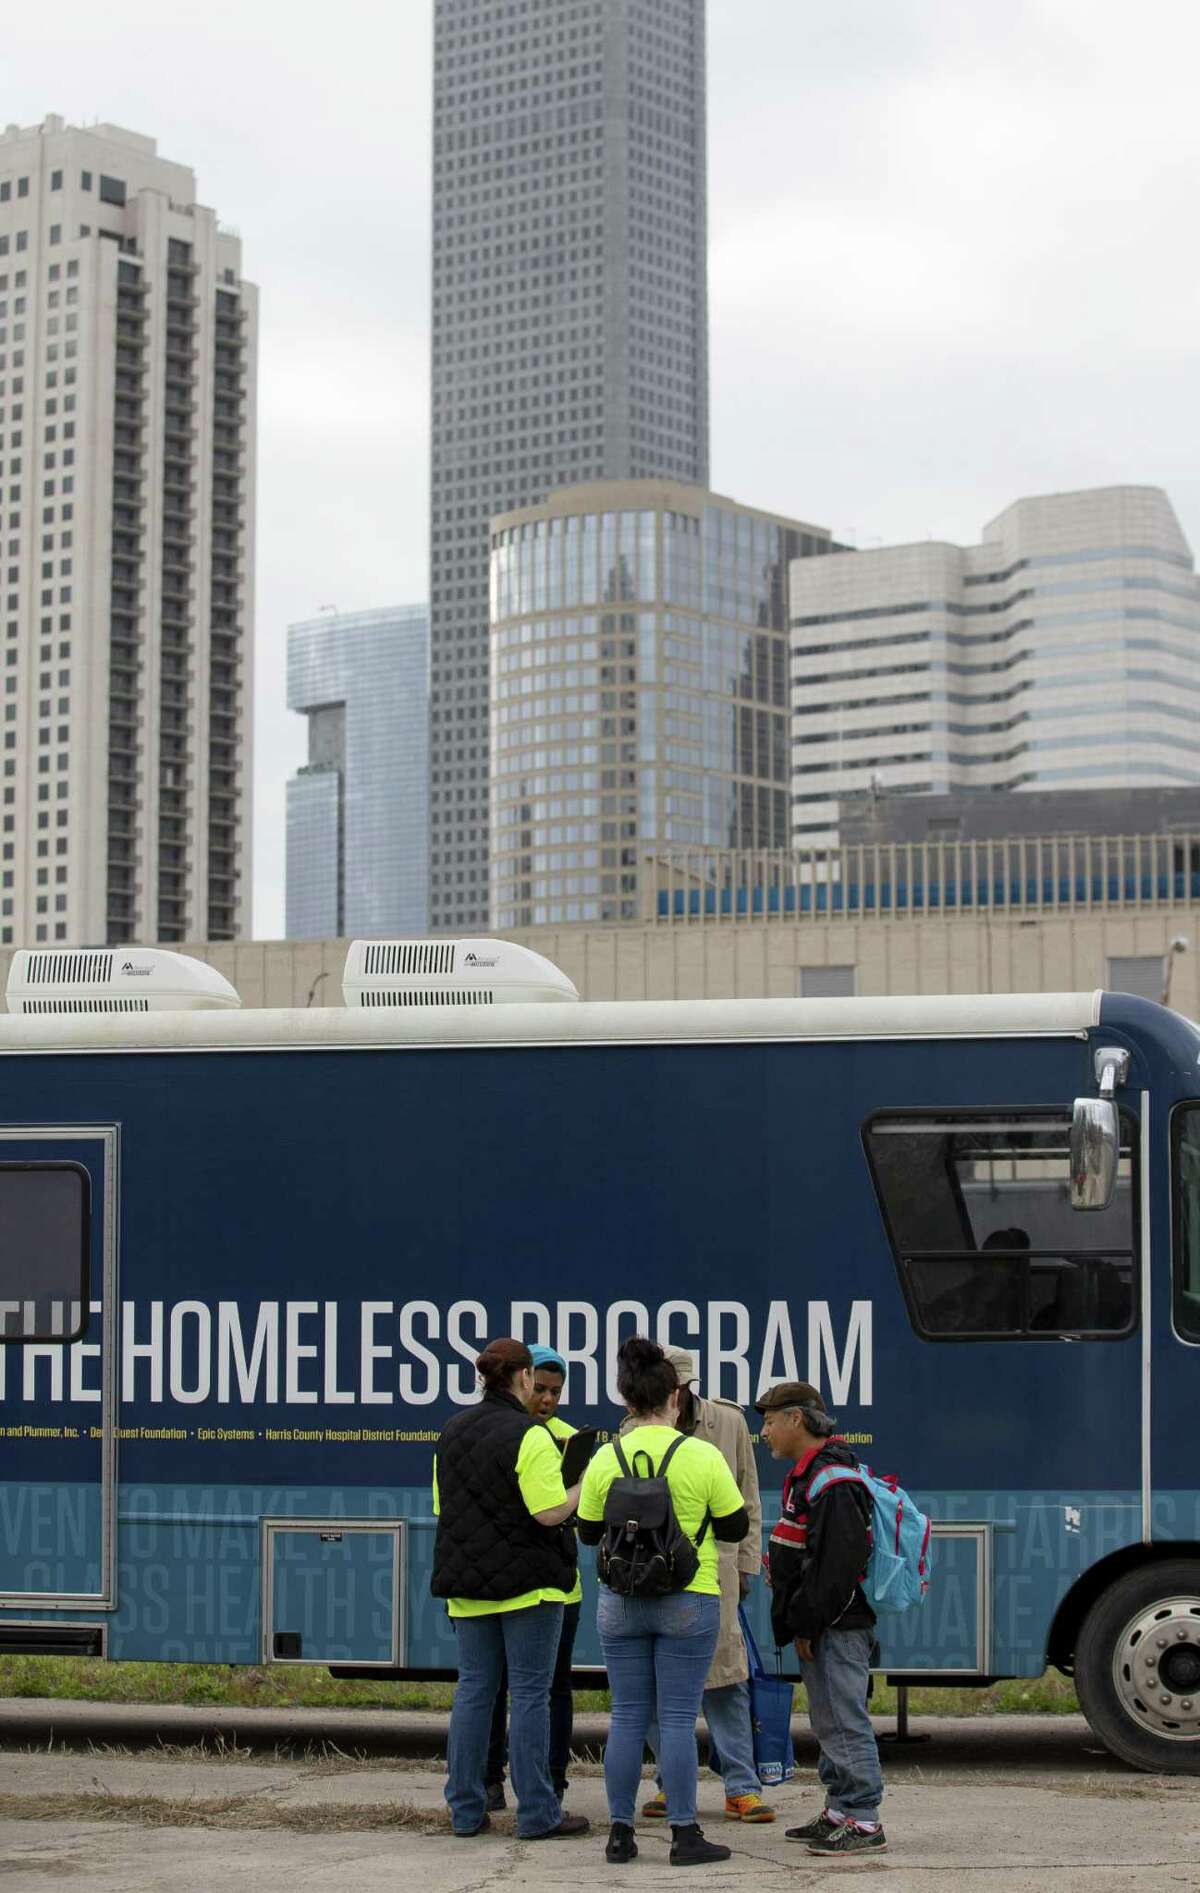 Volunteers and staff from the Houston Coalition for the Homeless and The Way Home connected with the homeless population for the annual homeless count Tuesday, Jan. 22, 2019, in Houston.